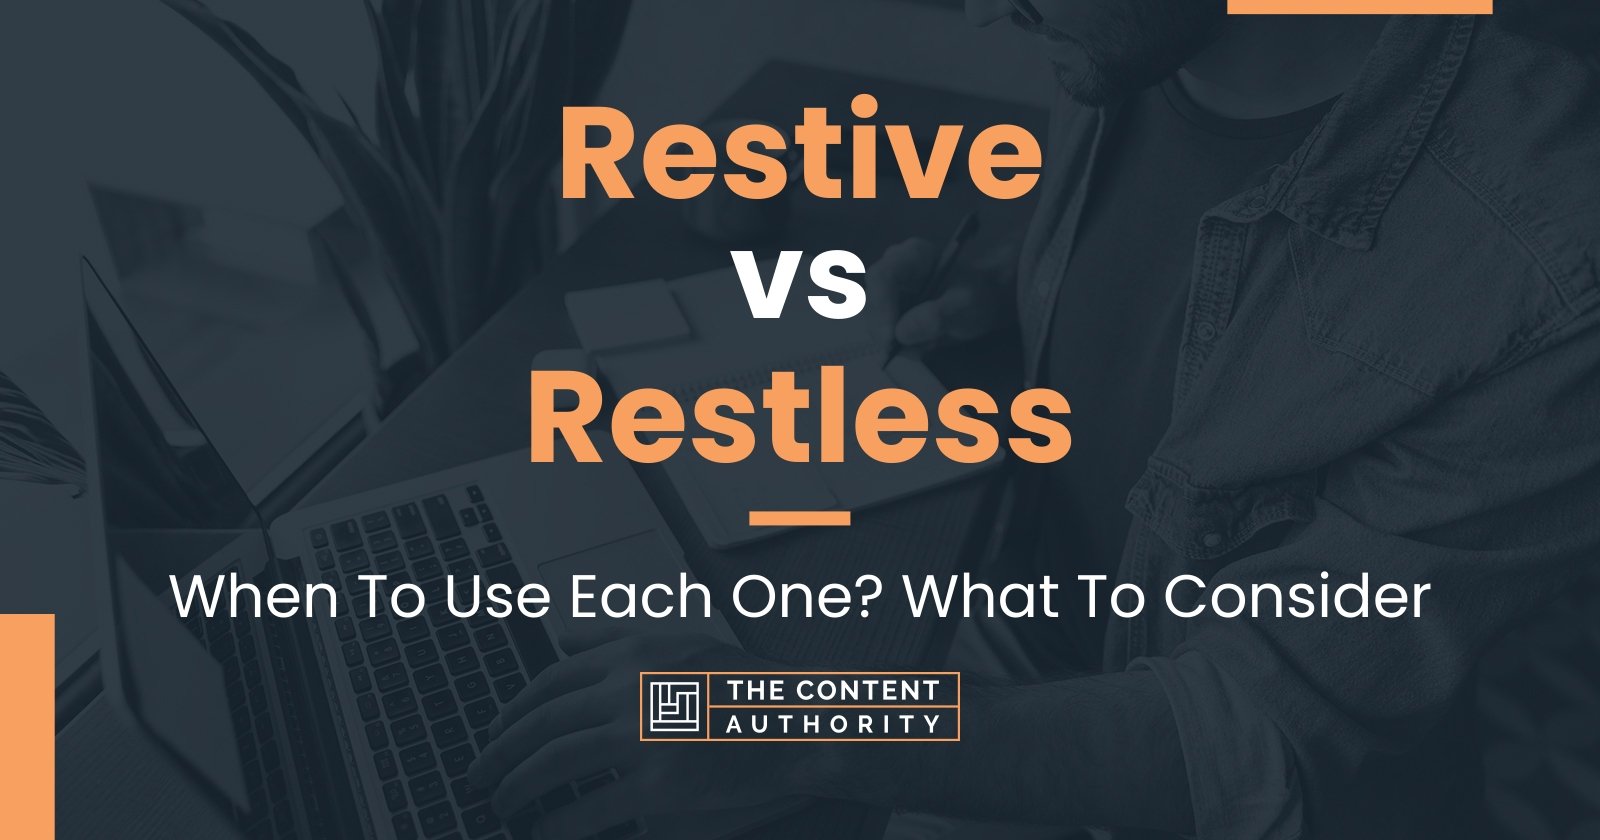 Restive vs Restless: When To Use Each One? What To Consider